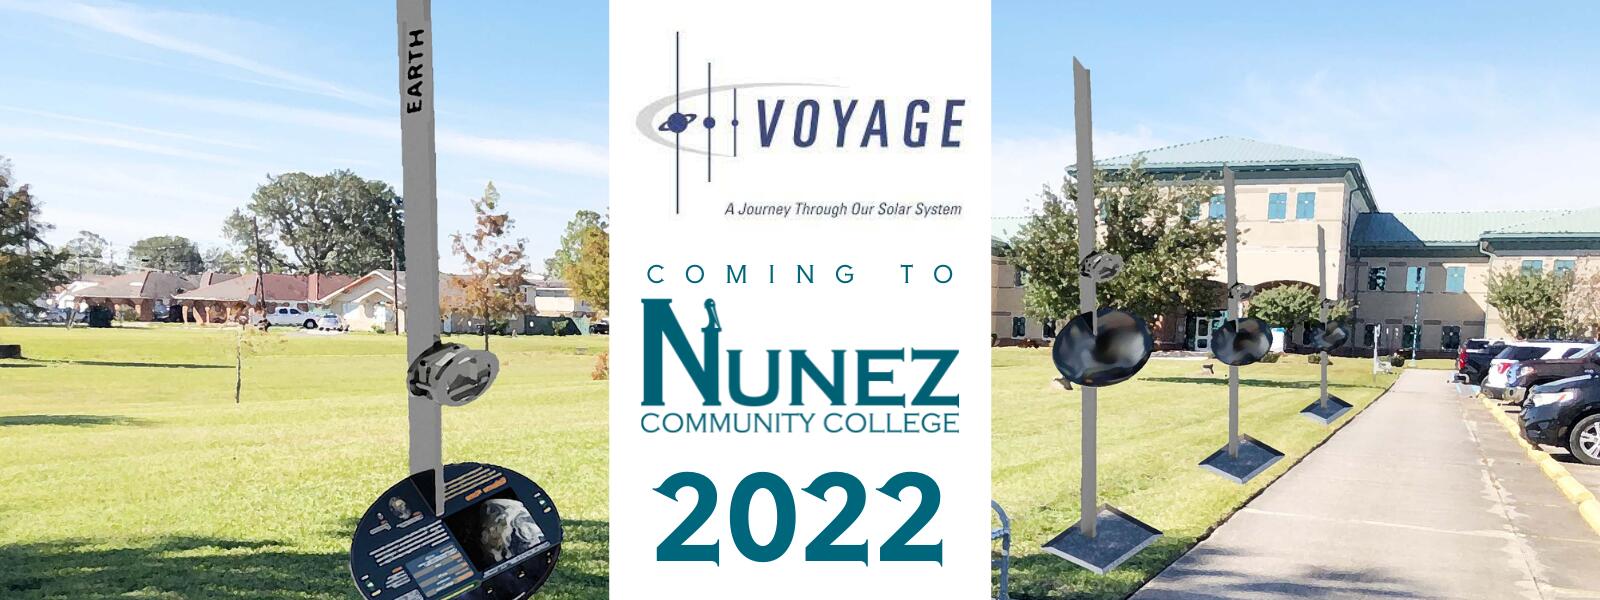 Conting to Nunez 2022:  Voyage - A Journey Through Our Solar System:  Click Here for More Information.